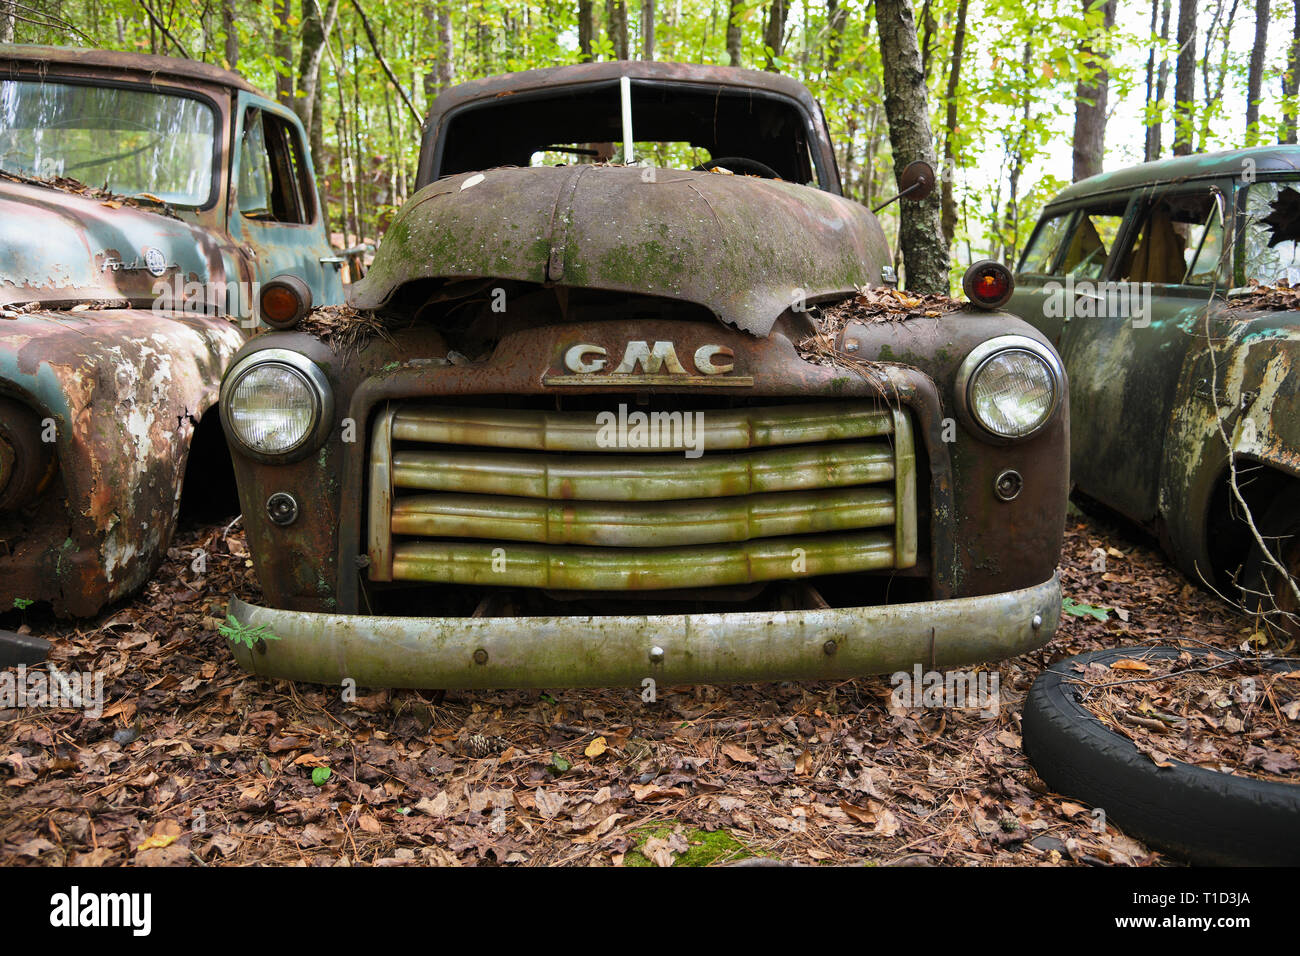 White, GA / USA - October27, 2018 - Close-up Image of an Old Scrap GMC Truck in a Junk Yard Stock Photo